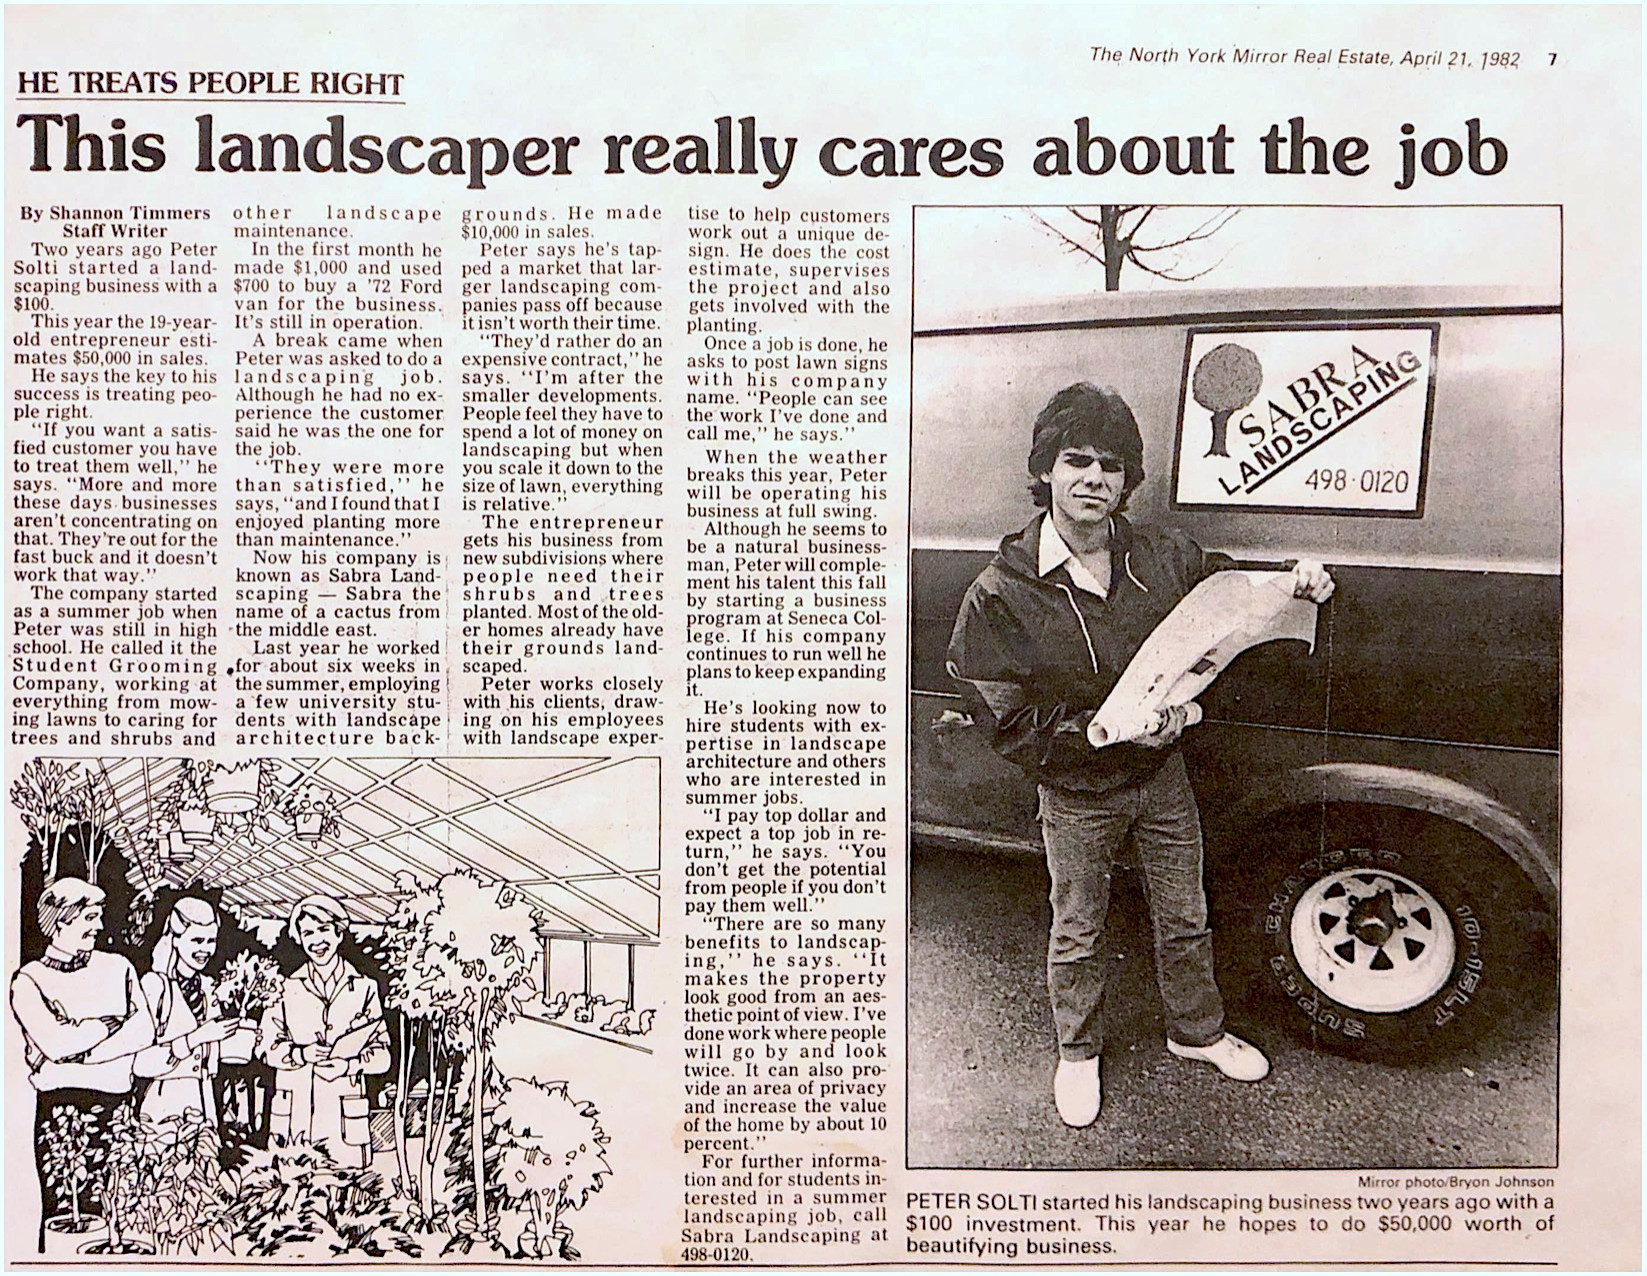 North York Mirror Article on Peter Solti - Sabra Landscaping